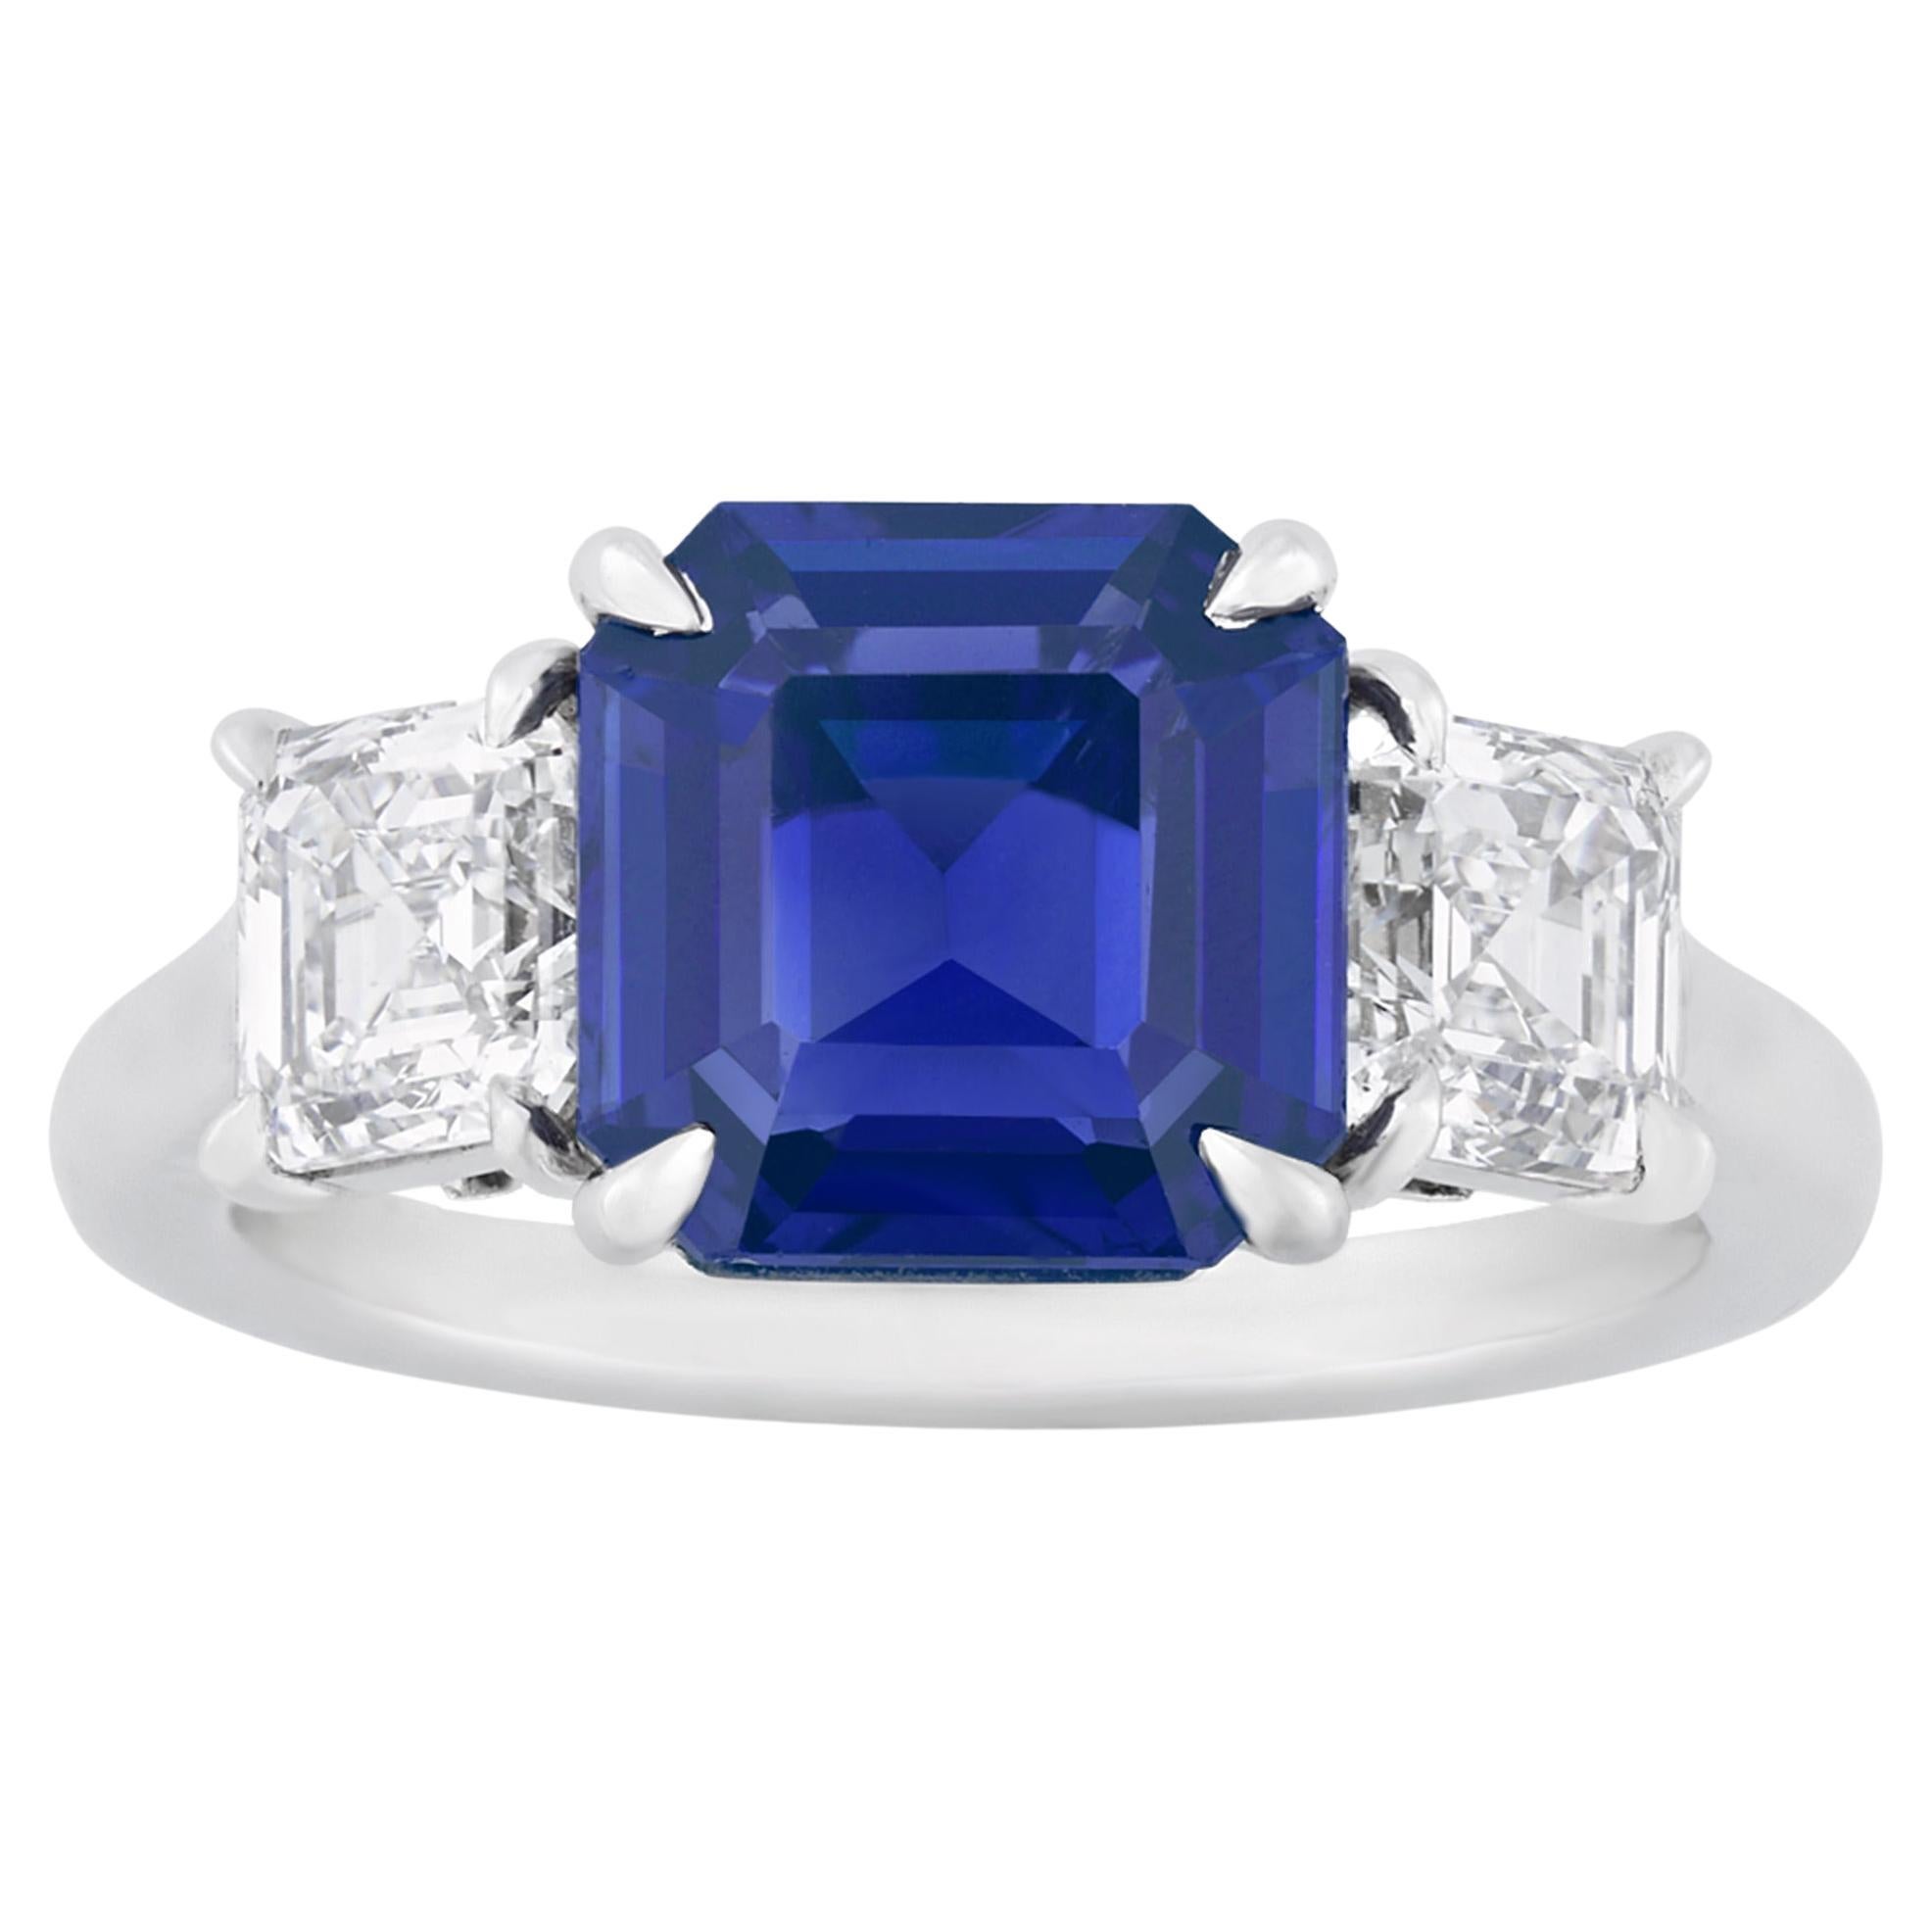 Untreated Kashmir Sapphire Ring, 3.32 Carats